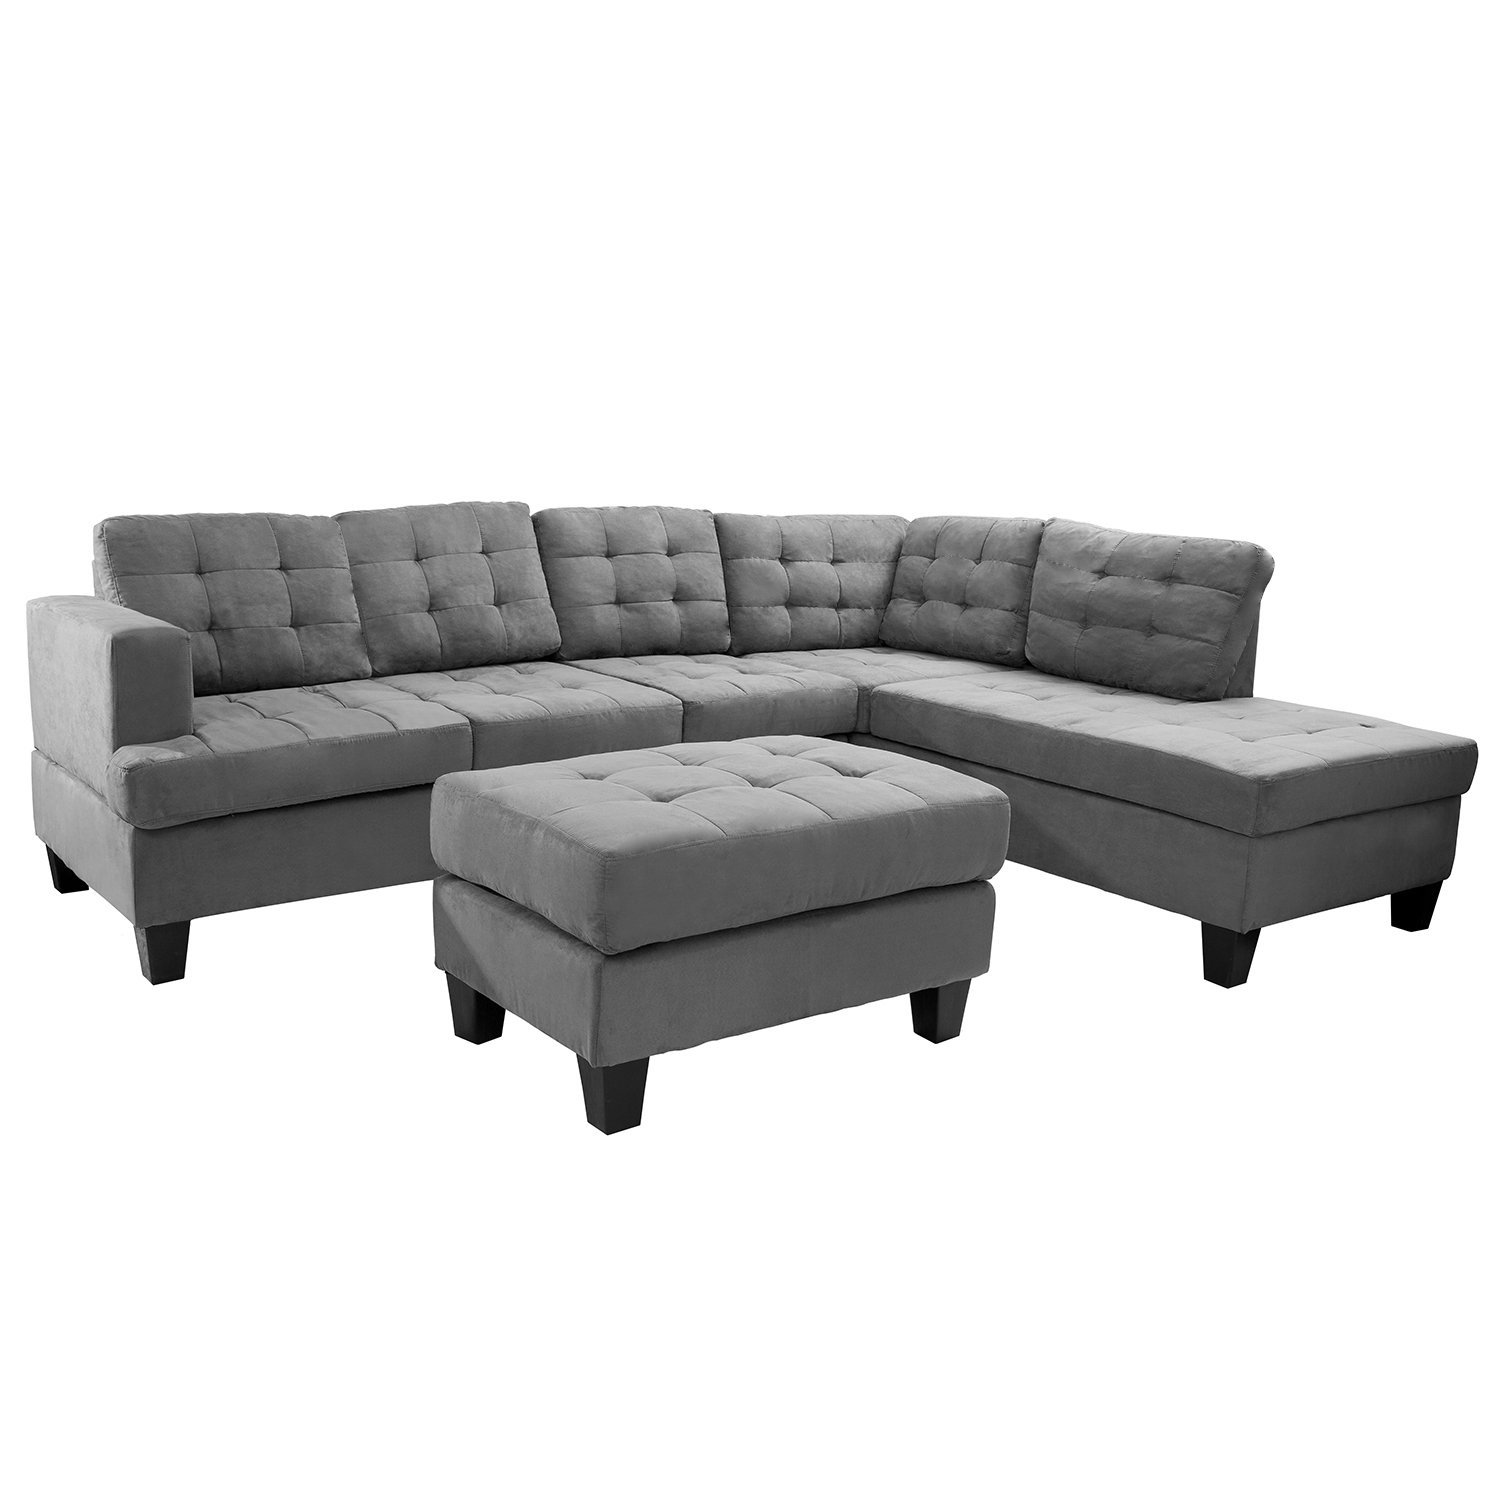 Merax 3-piece Reversible Sectional Sofa with Chaise and Ottoman, Suede Fabric / 6 pillows / Wooden Legs, Grey (Grey)